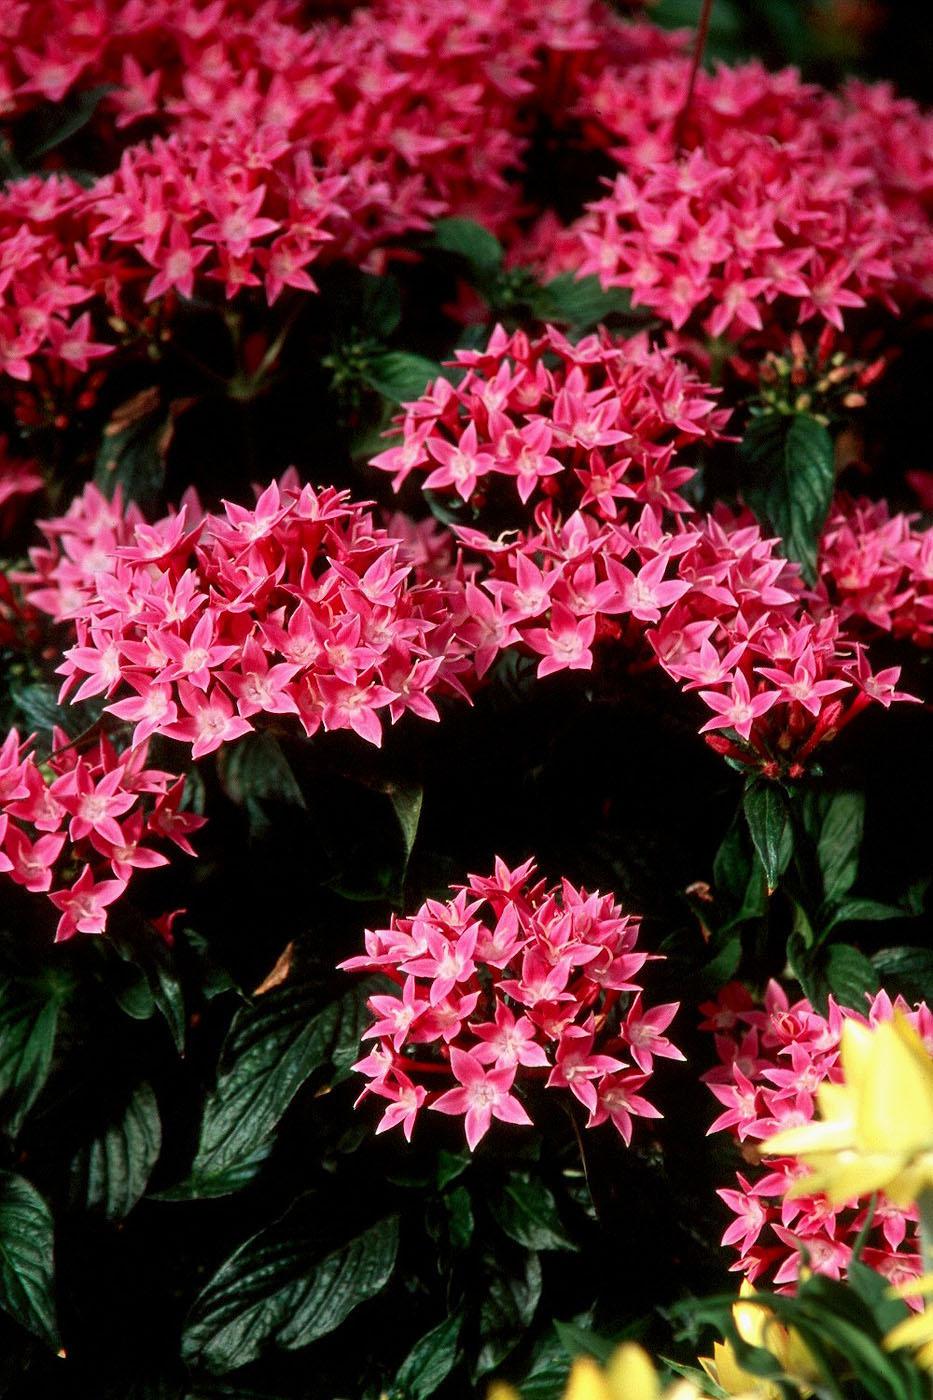 Butterflies, hummingbirds and gardeners alike will be delighted with the many new series of pentas being offered, such as this beautiful Bismarck variety. If these new varieties are not available at local nurseries this year, gardeners can rely on Mississippi Medallion Award-winning Butterfly pentas for a lush, tropical look and tons of butterfly guests.